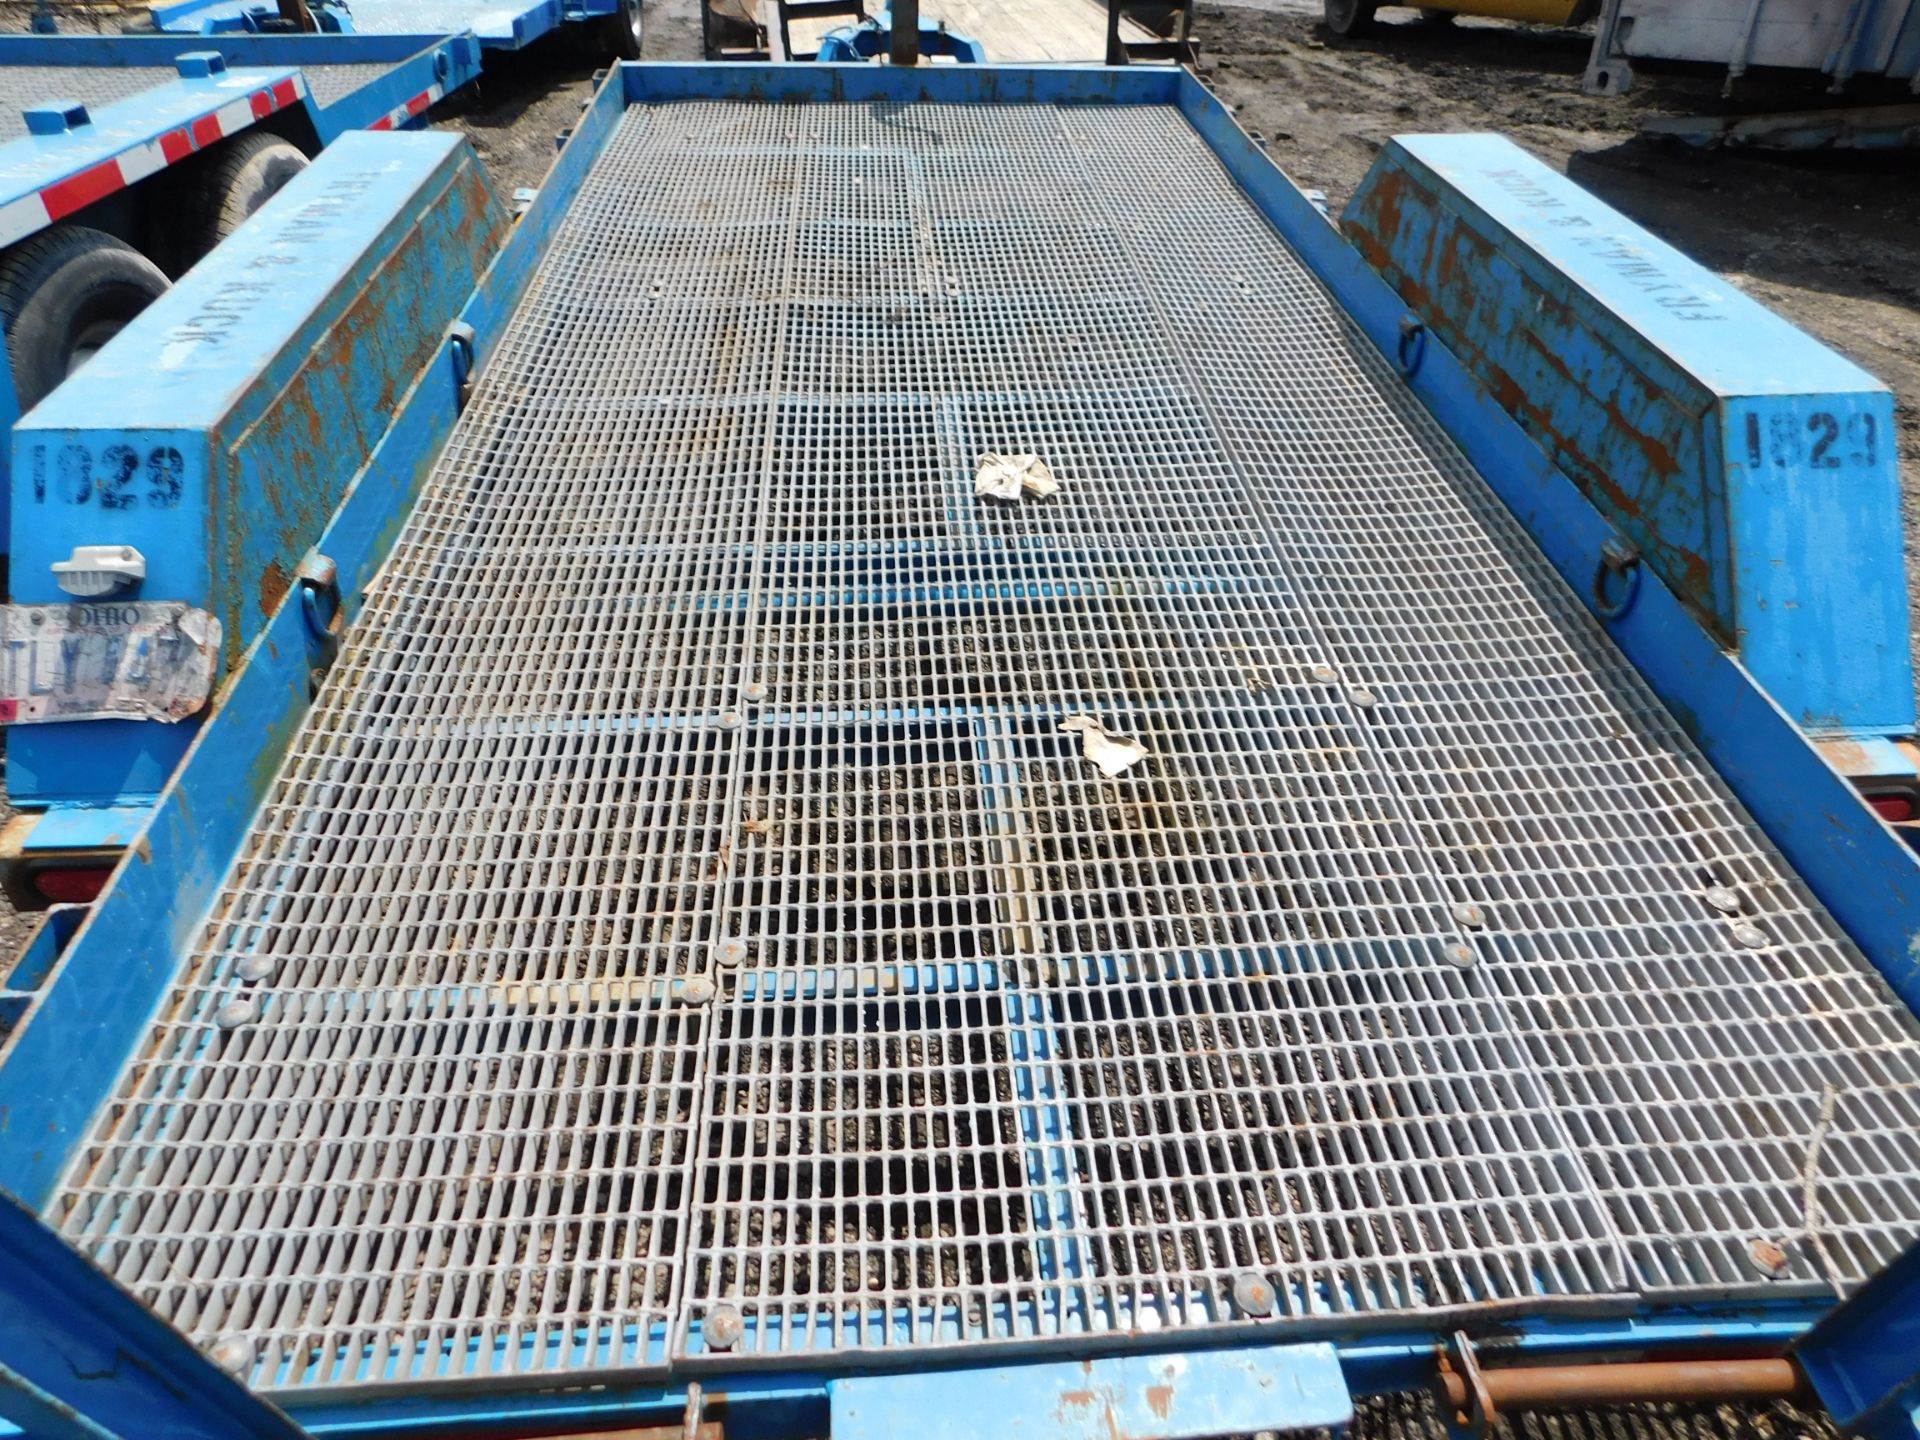 7'W x 15' Long Trailer with Grated Deck, Pintle Hitch, Ramps, Tandem Axle - Image 5 of 9